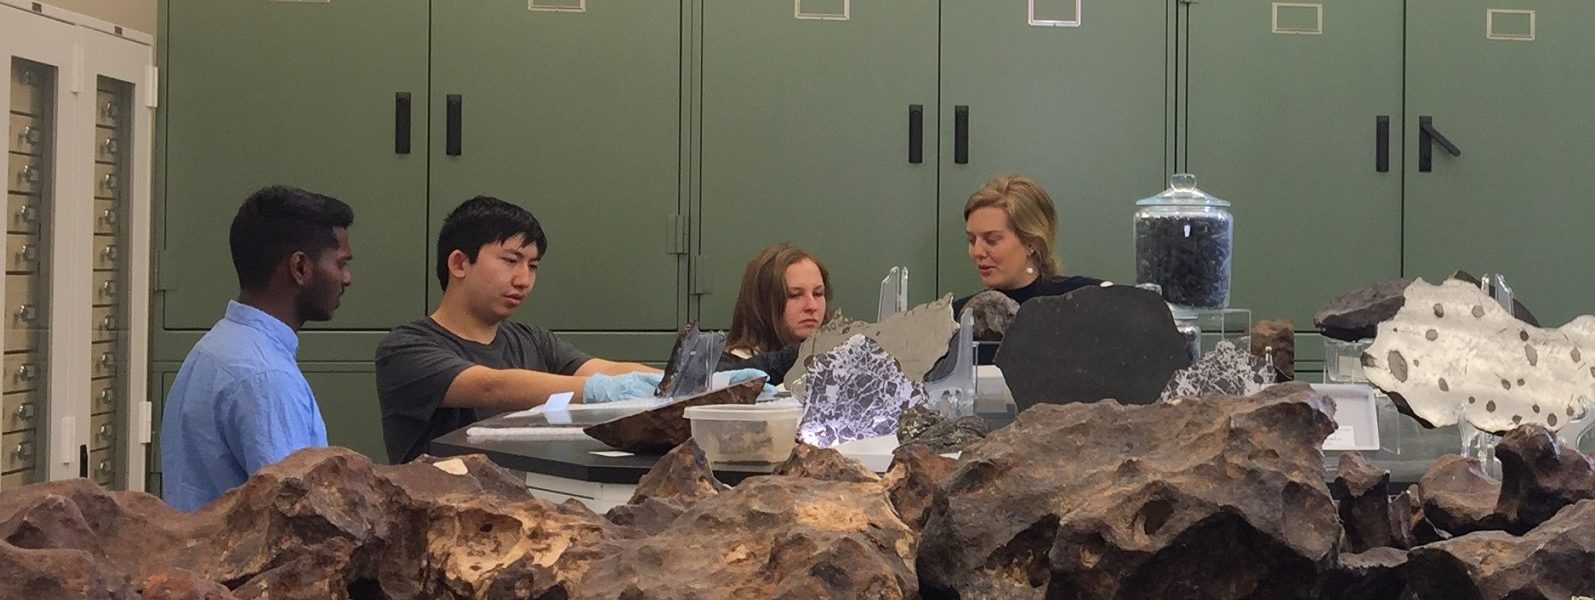 Four students stand behind a table covered with rocks and other materials for projects.